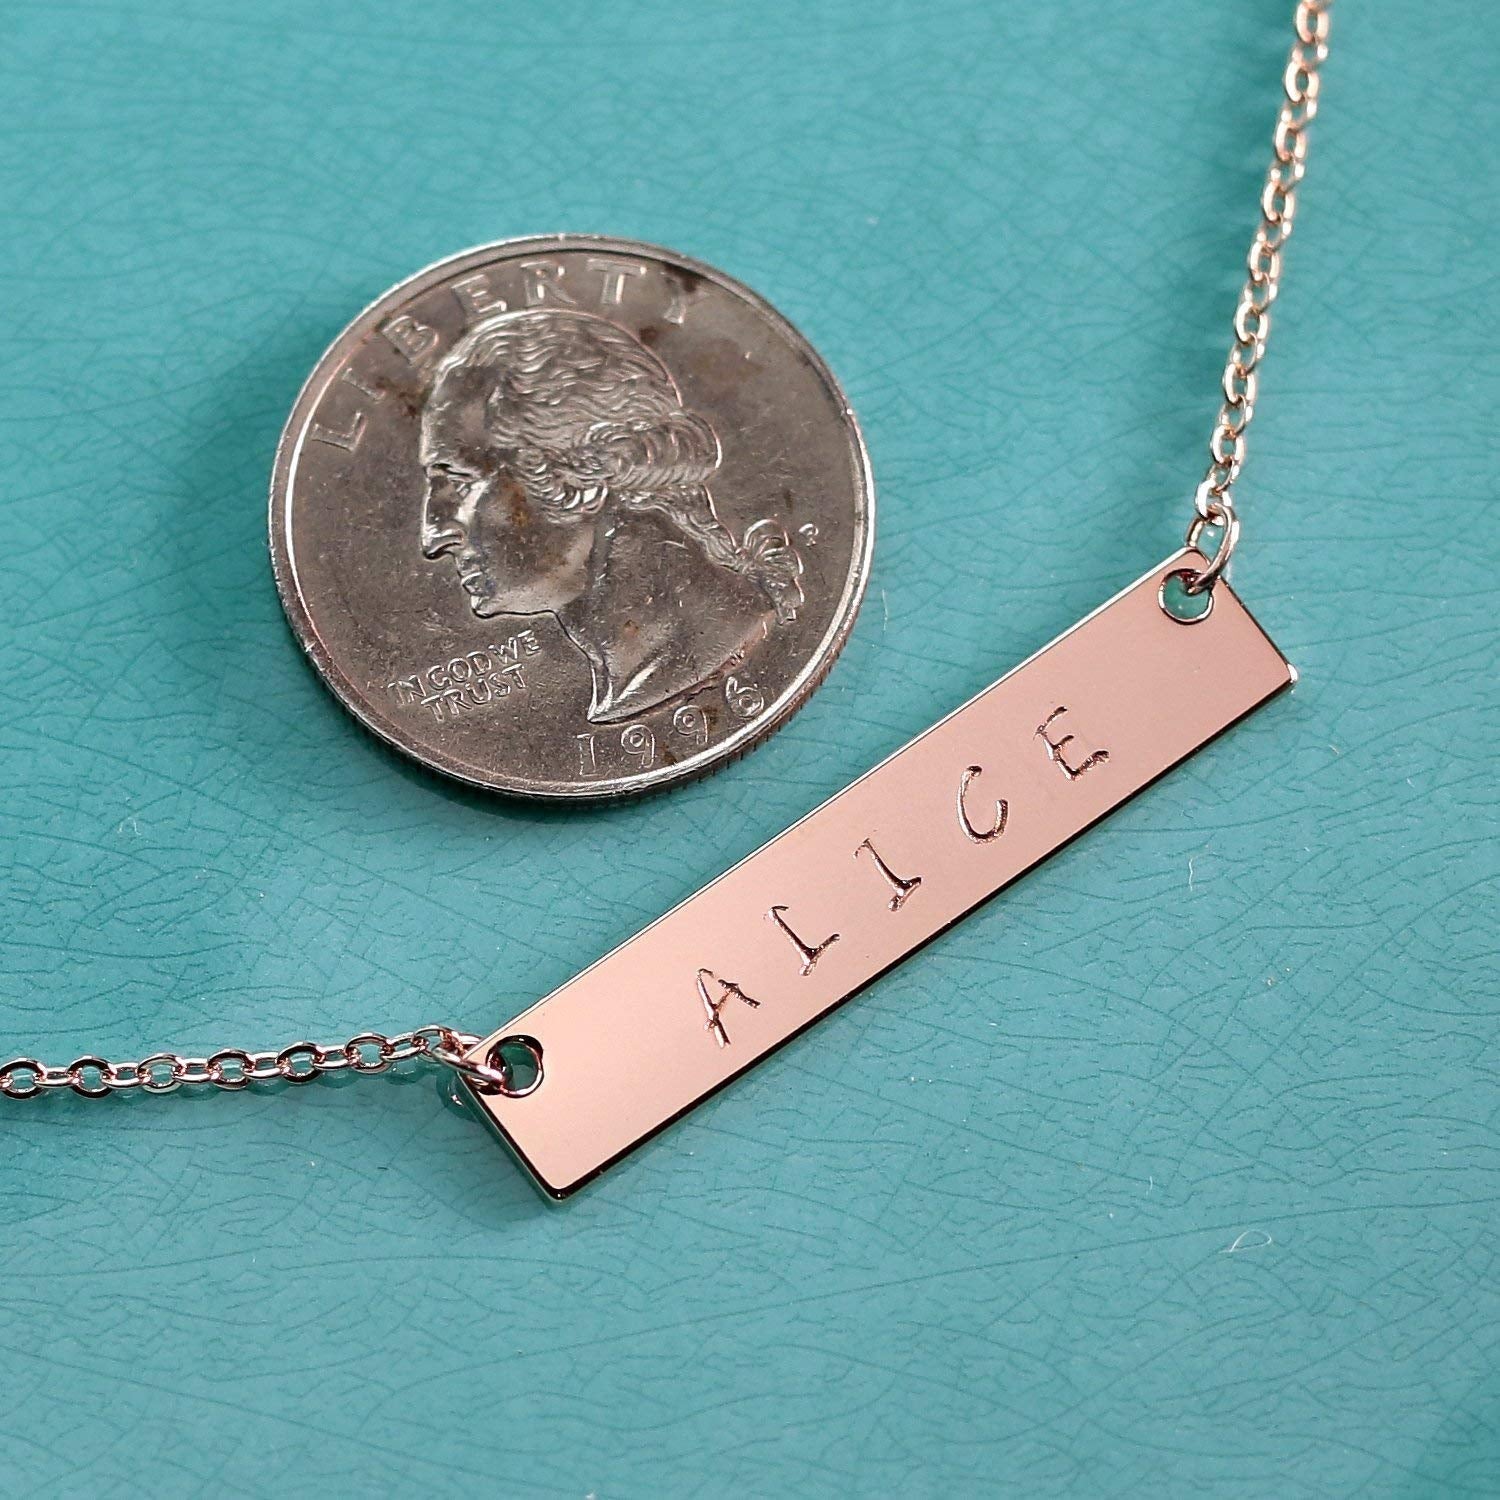 Buy Custom Engraved Necklace With Dainty Bar - Personalized 16K Plated Jewelry at Petite Boutique